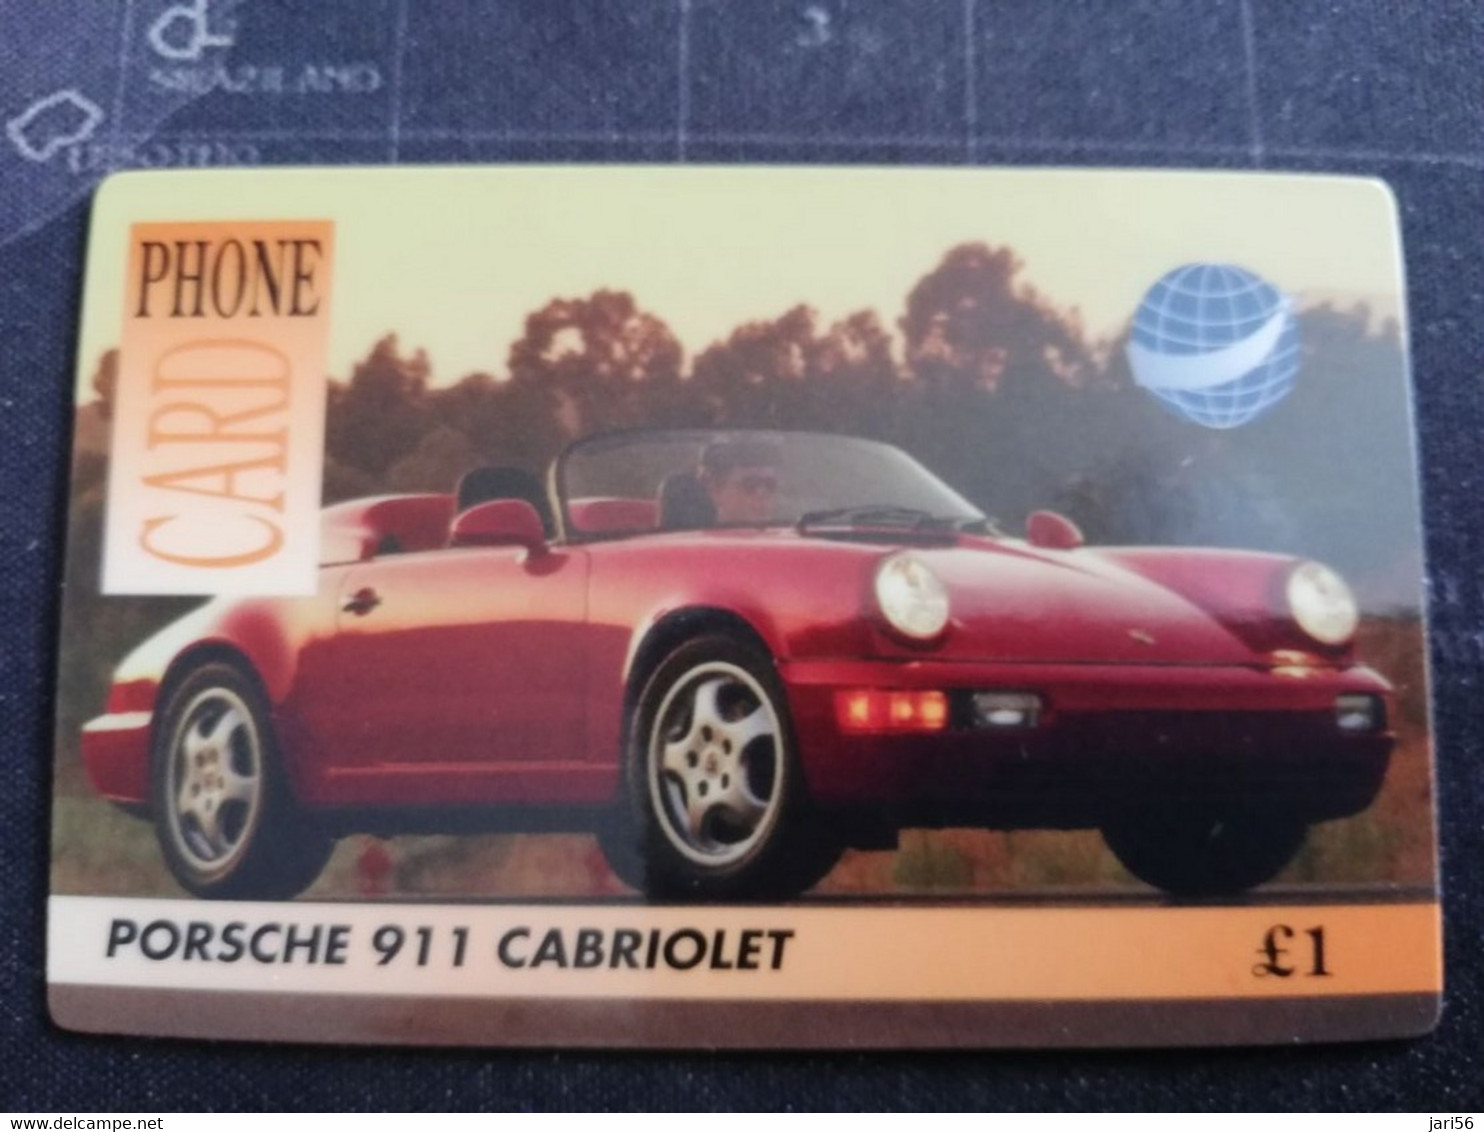 GREAT BRITAIN   1 POUND   PORSCHE 911 CABRIOLET    AUTOMOBILES/RACING CARS /SPORT CARS  PREPAID      **3265** - Collections